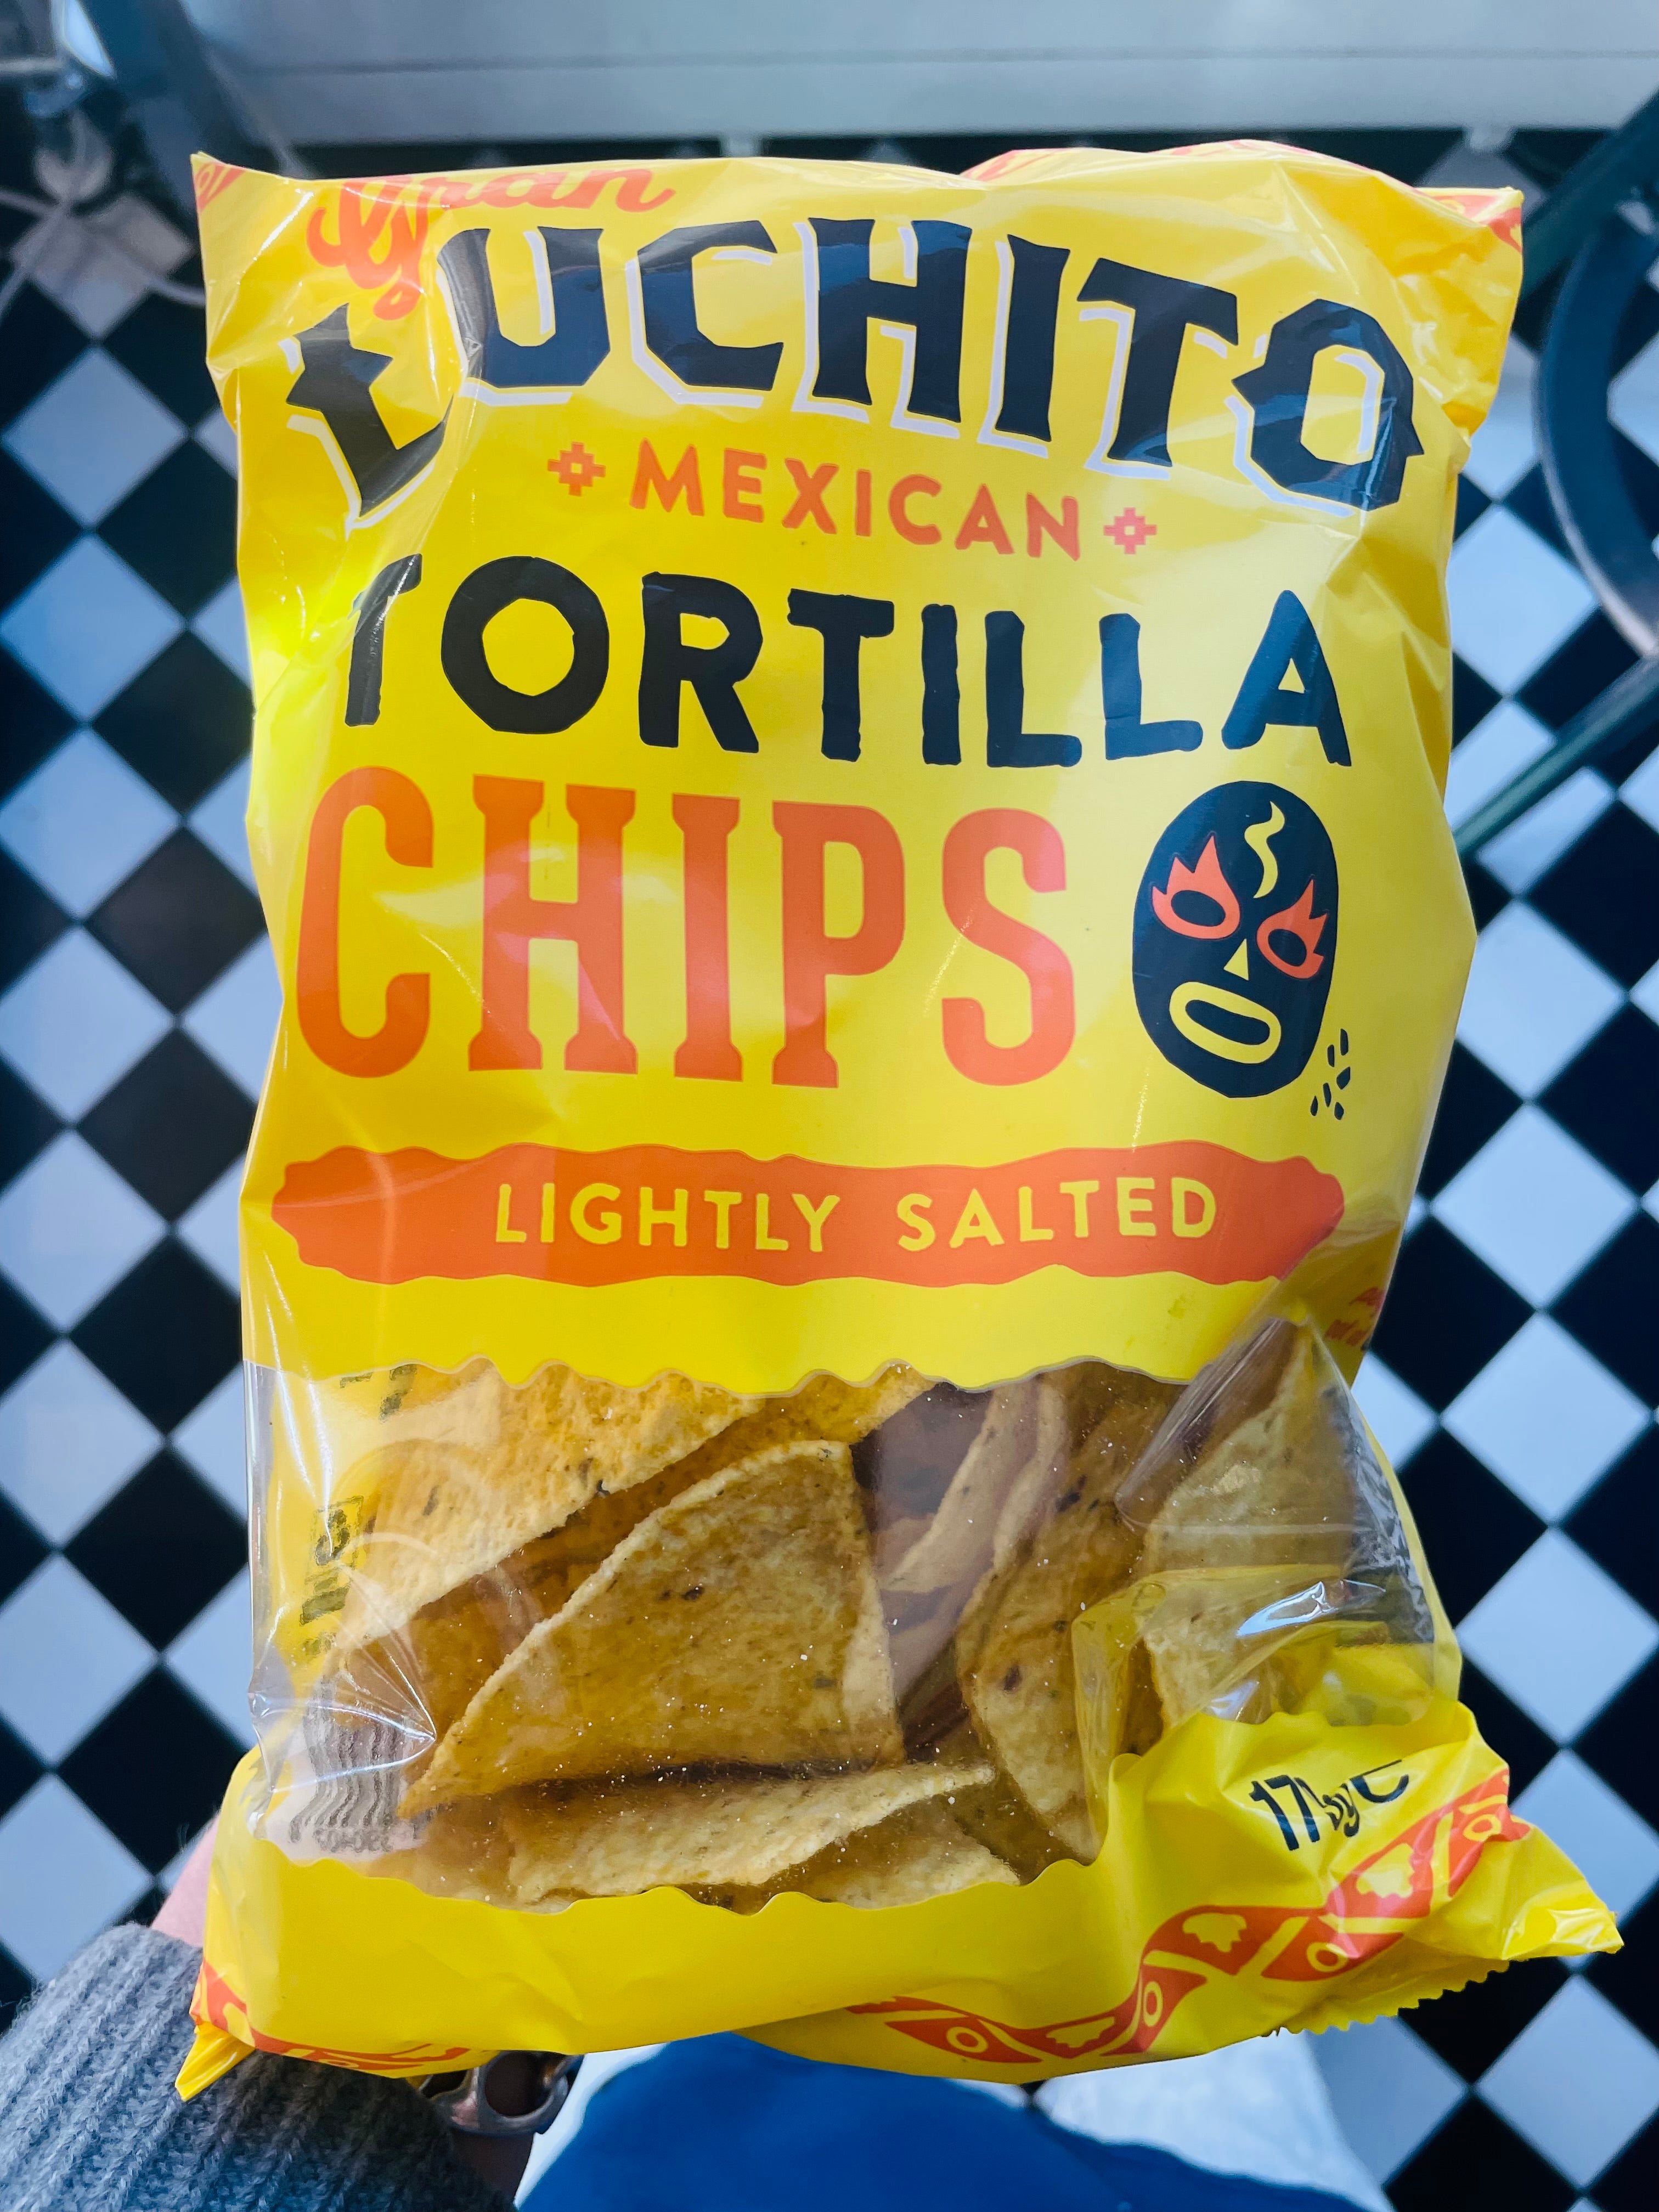 Luchito tortillachips, lightly salted